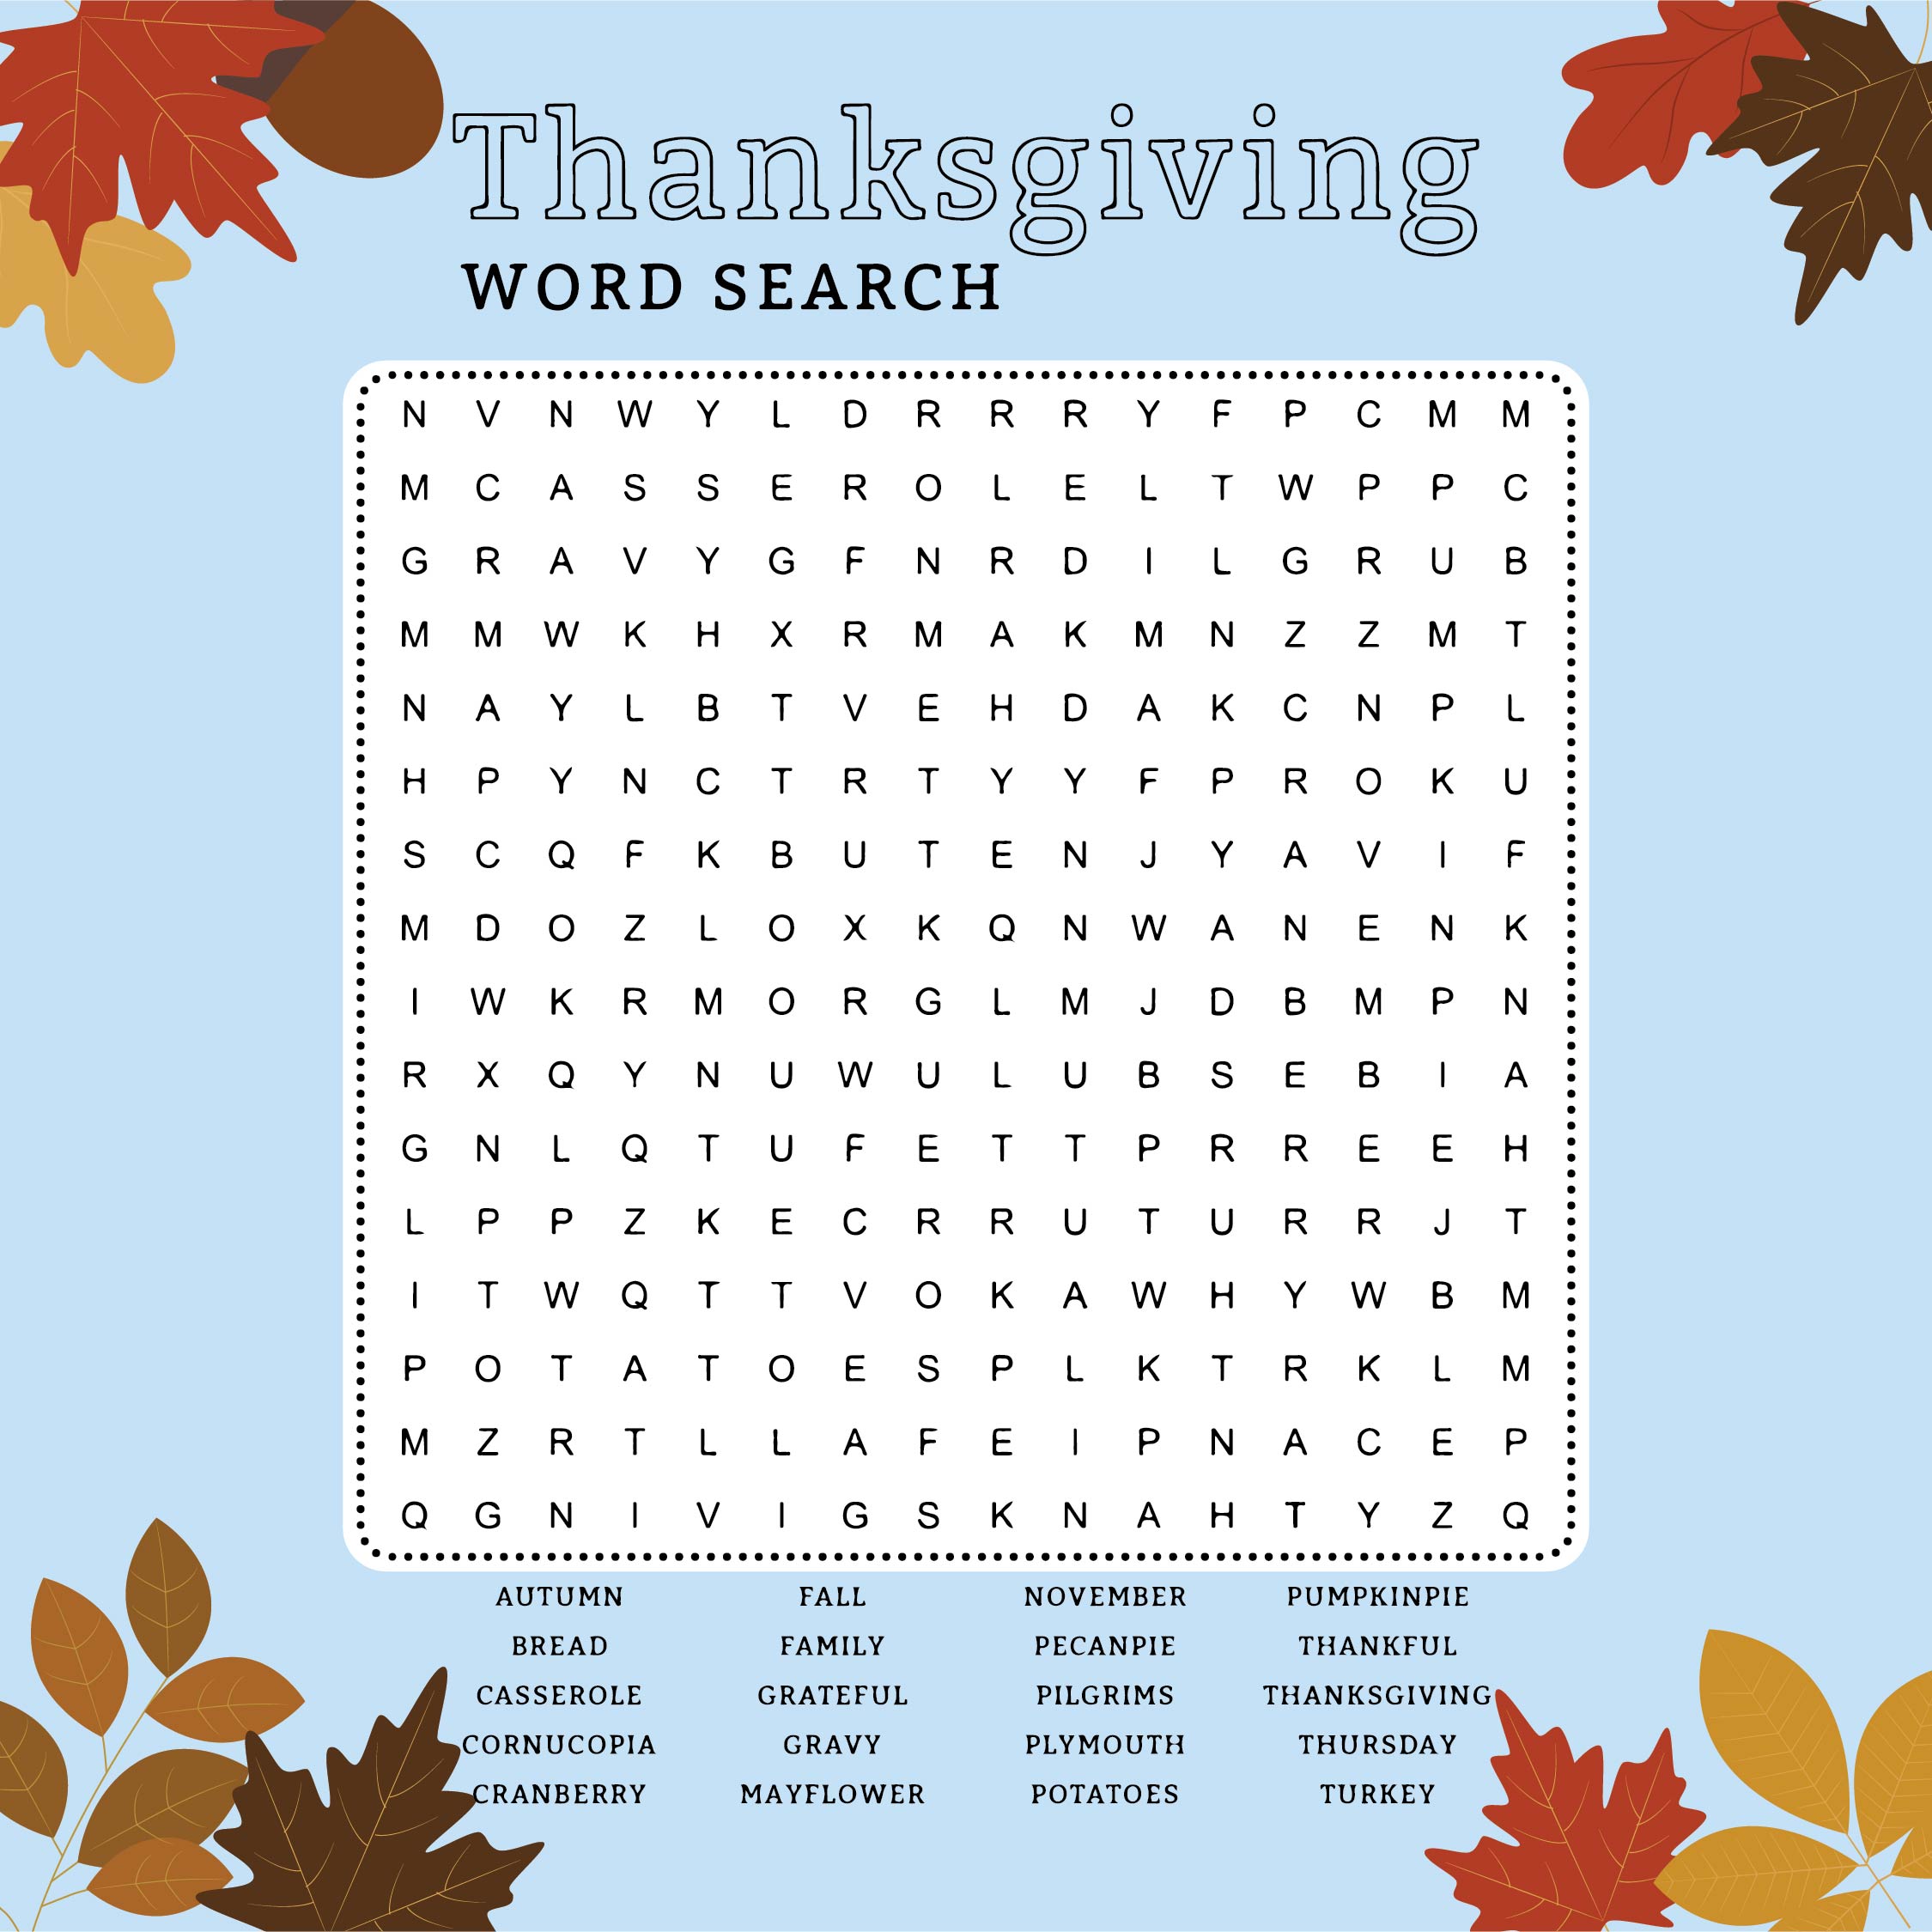 6-best-images-of-thanksgiving-words-printable-thanksgiving-word-scramble-thanksgiving-word